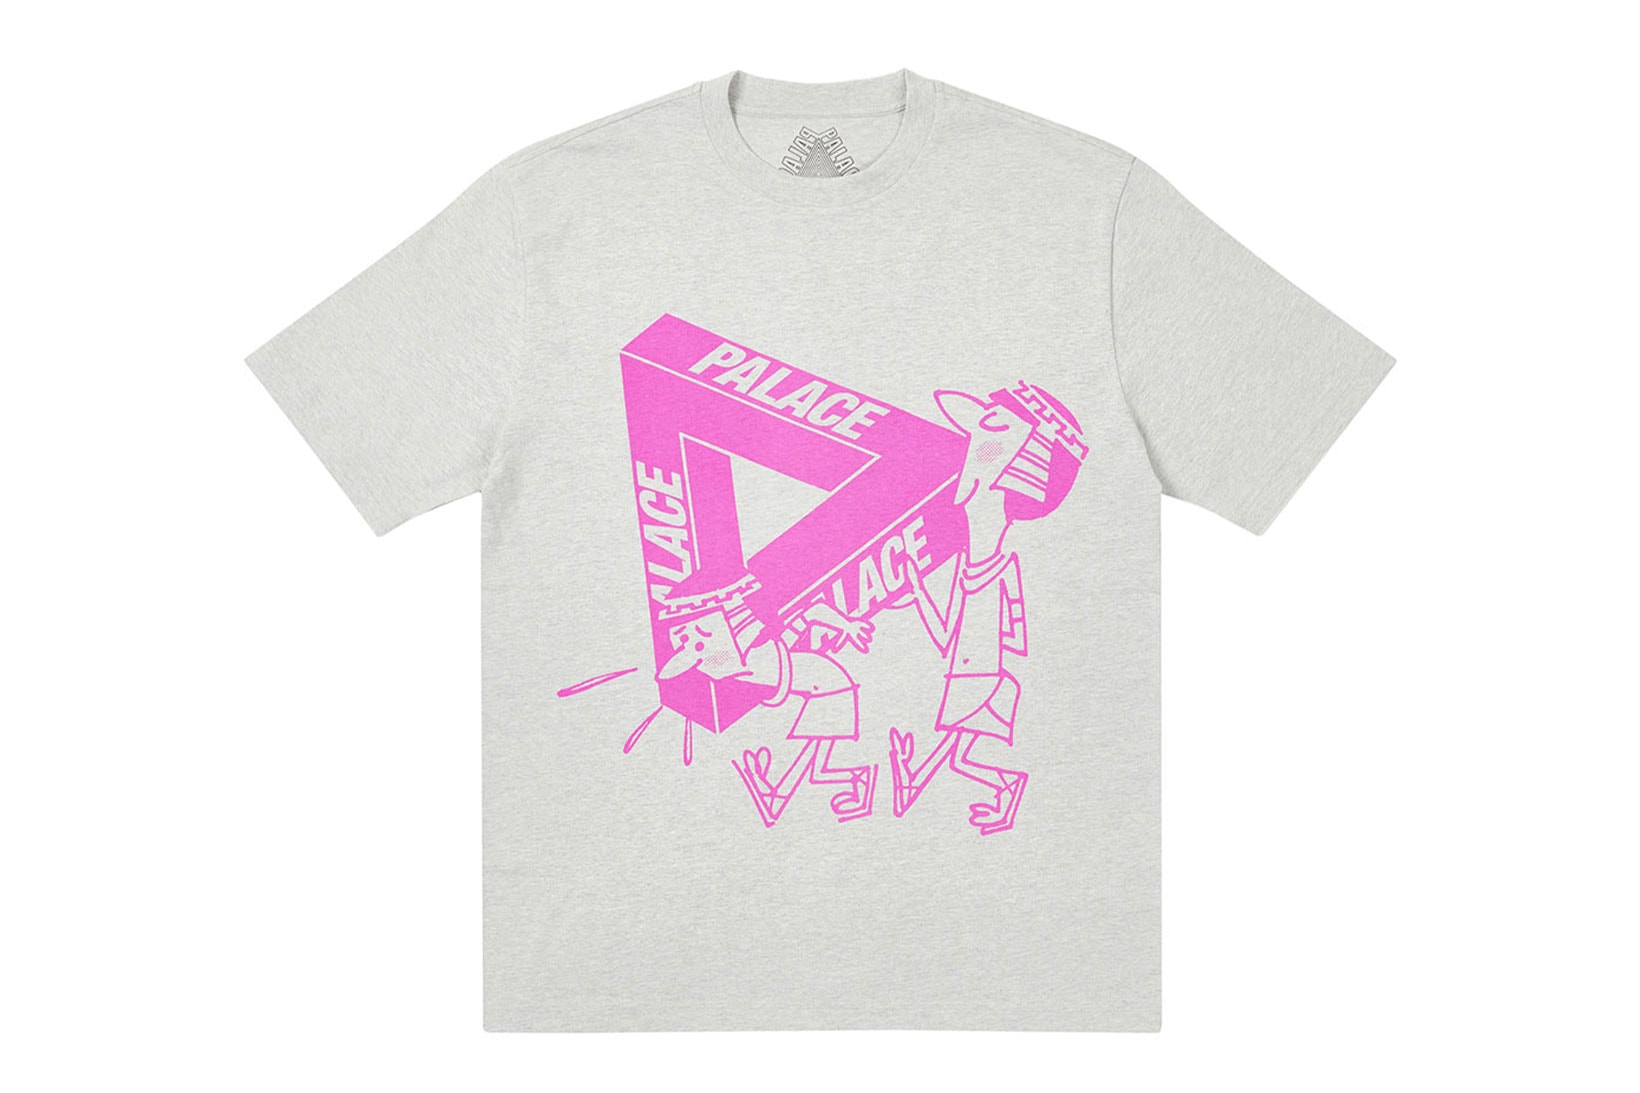 palace spring drop 4 collection graphic tshirt illustrations pink gray